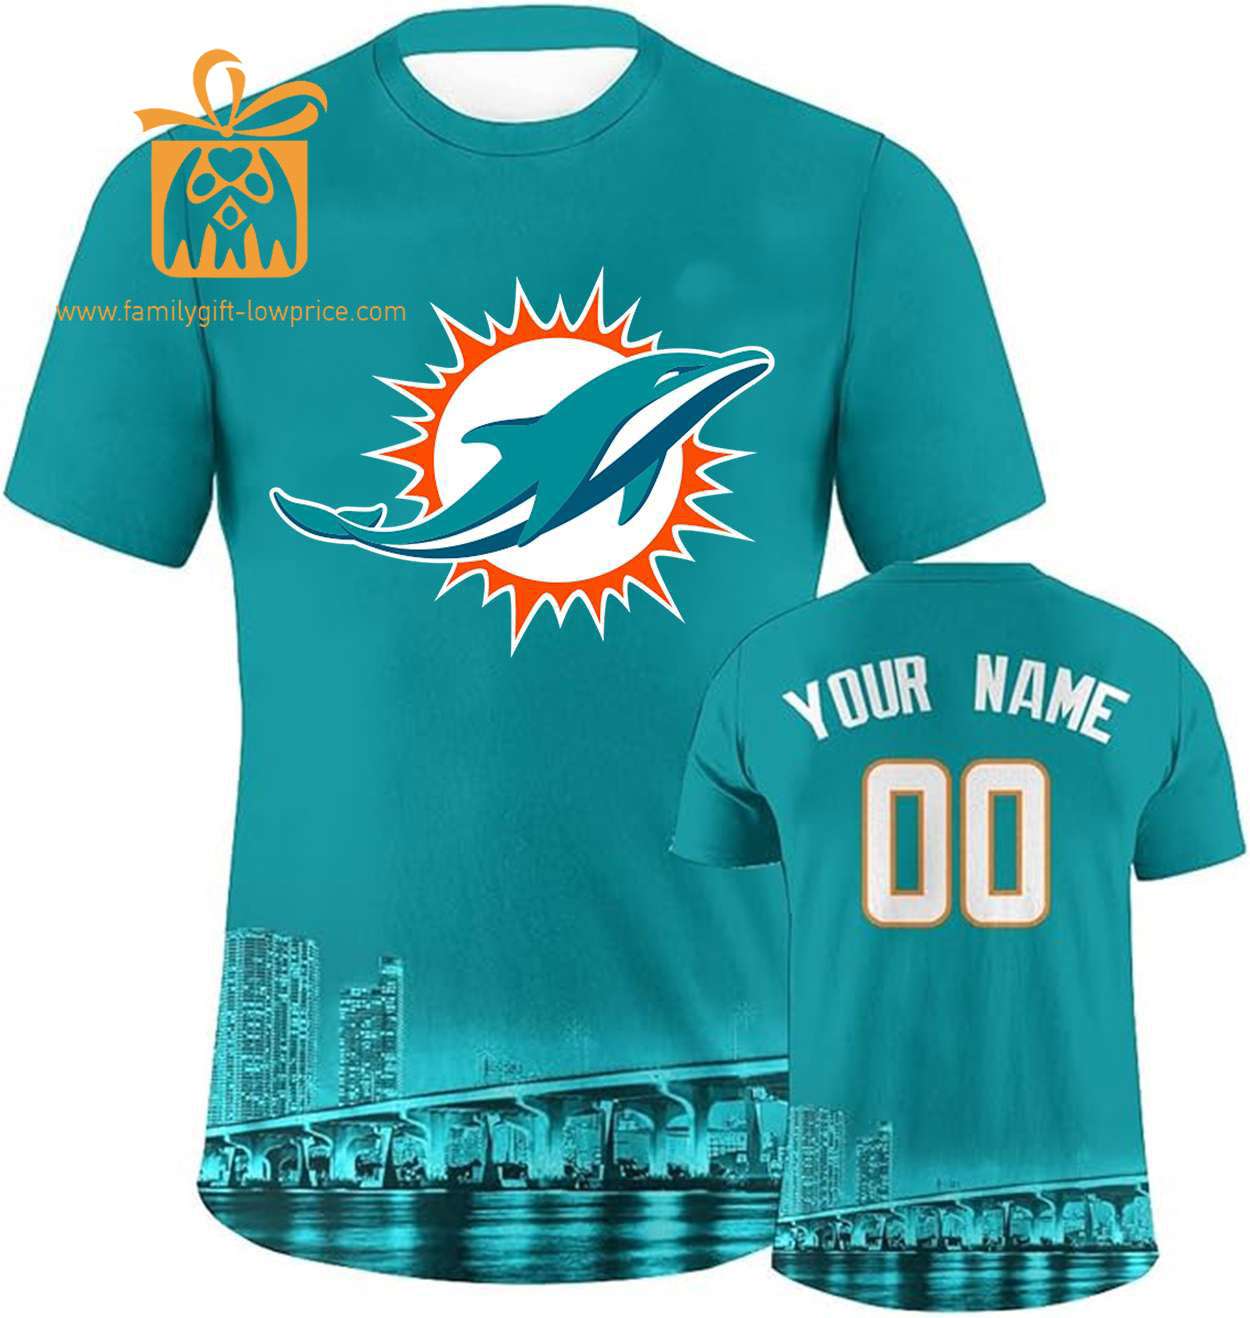 Miami Dolphins Custom Football Shirts - Personalized Name & Number, Ideal for Fans